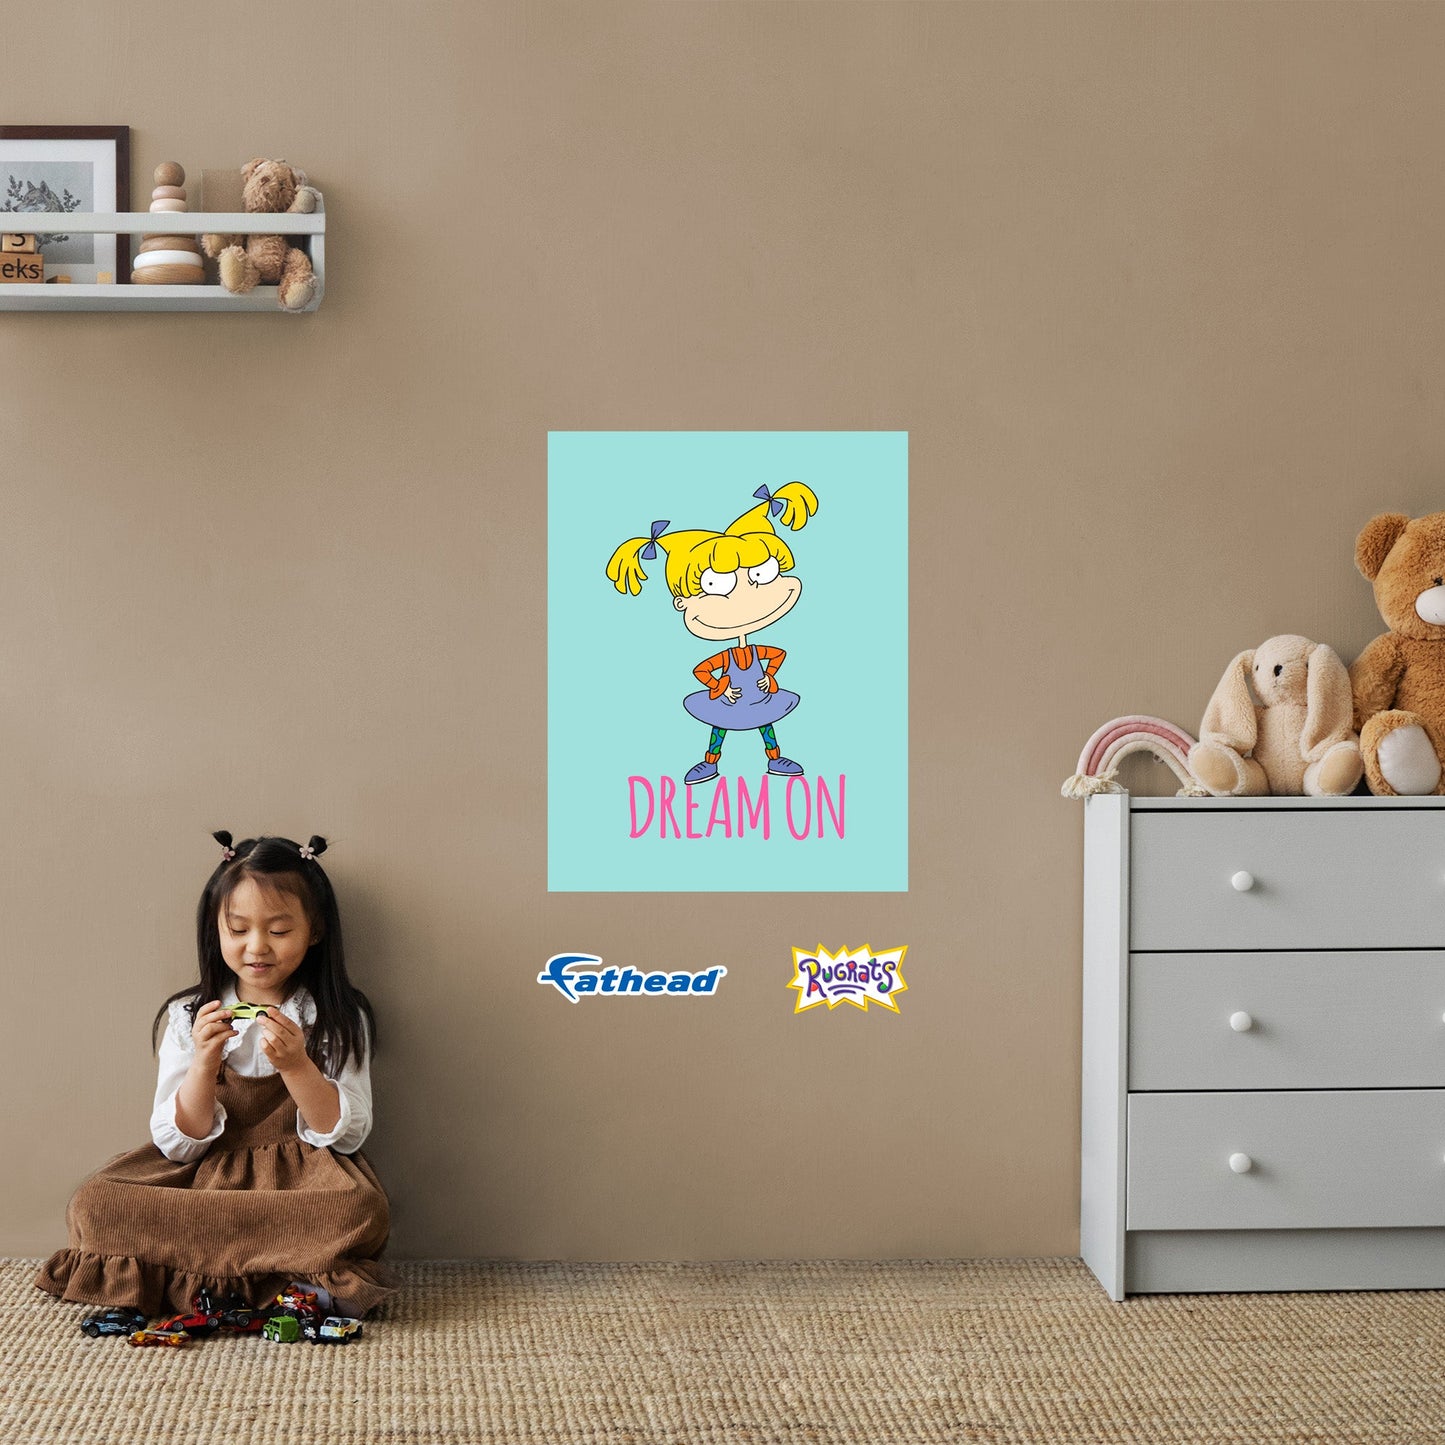 Rugrats: Dream On Poster - Officially Licensed Nickelodeon Removable Adhesive Decal